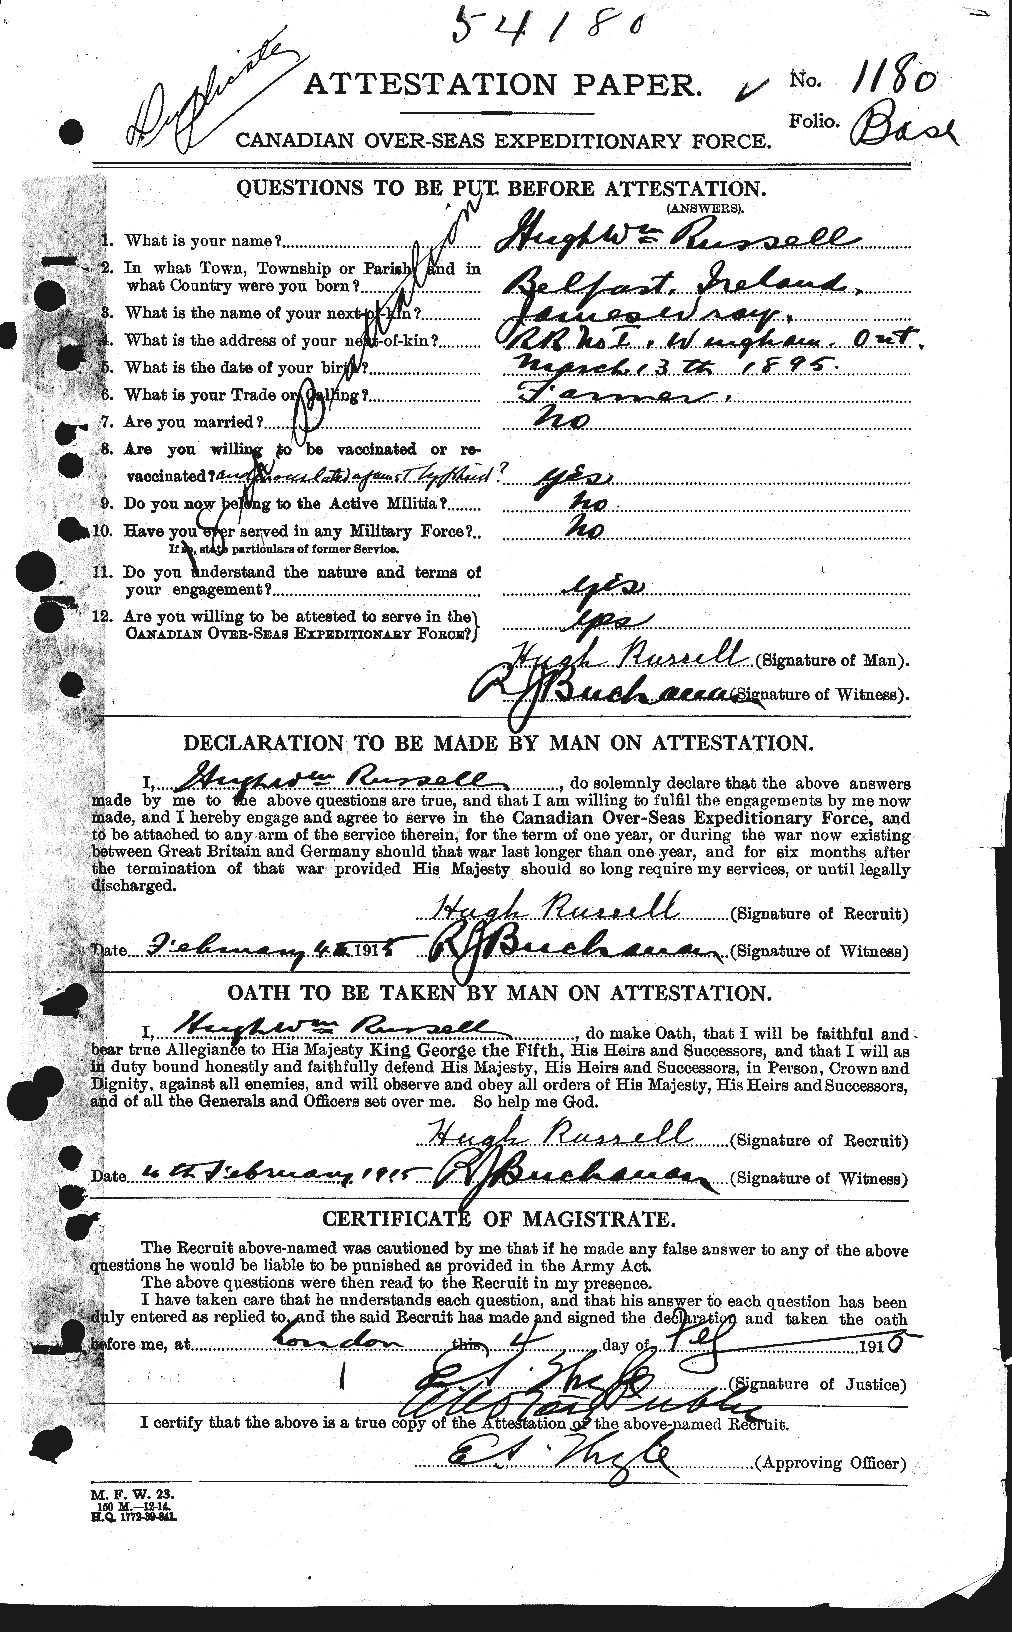 Personnel Records of the First World War - CEF 619015a